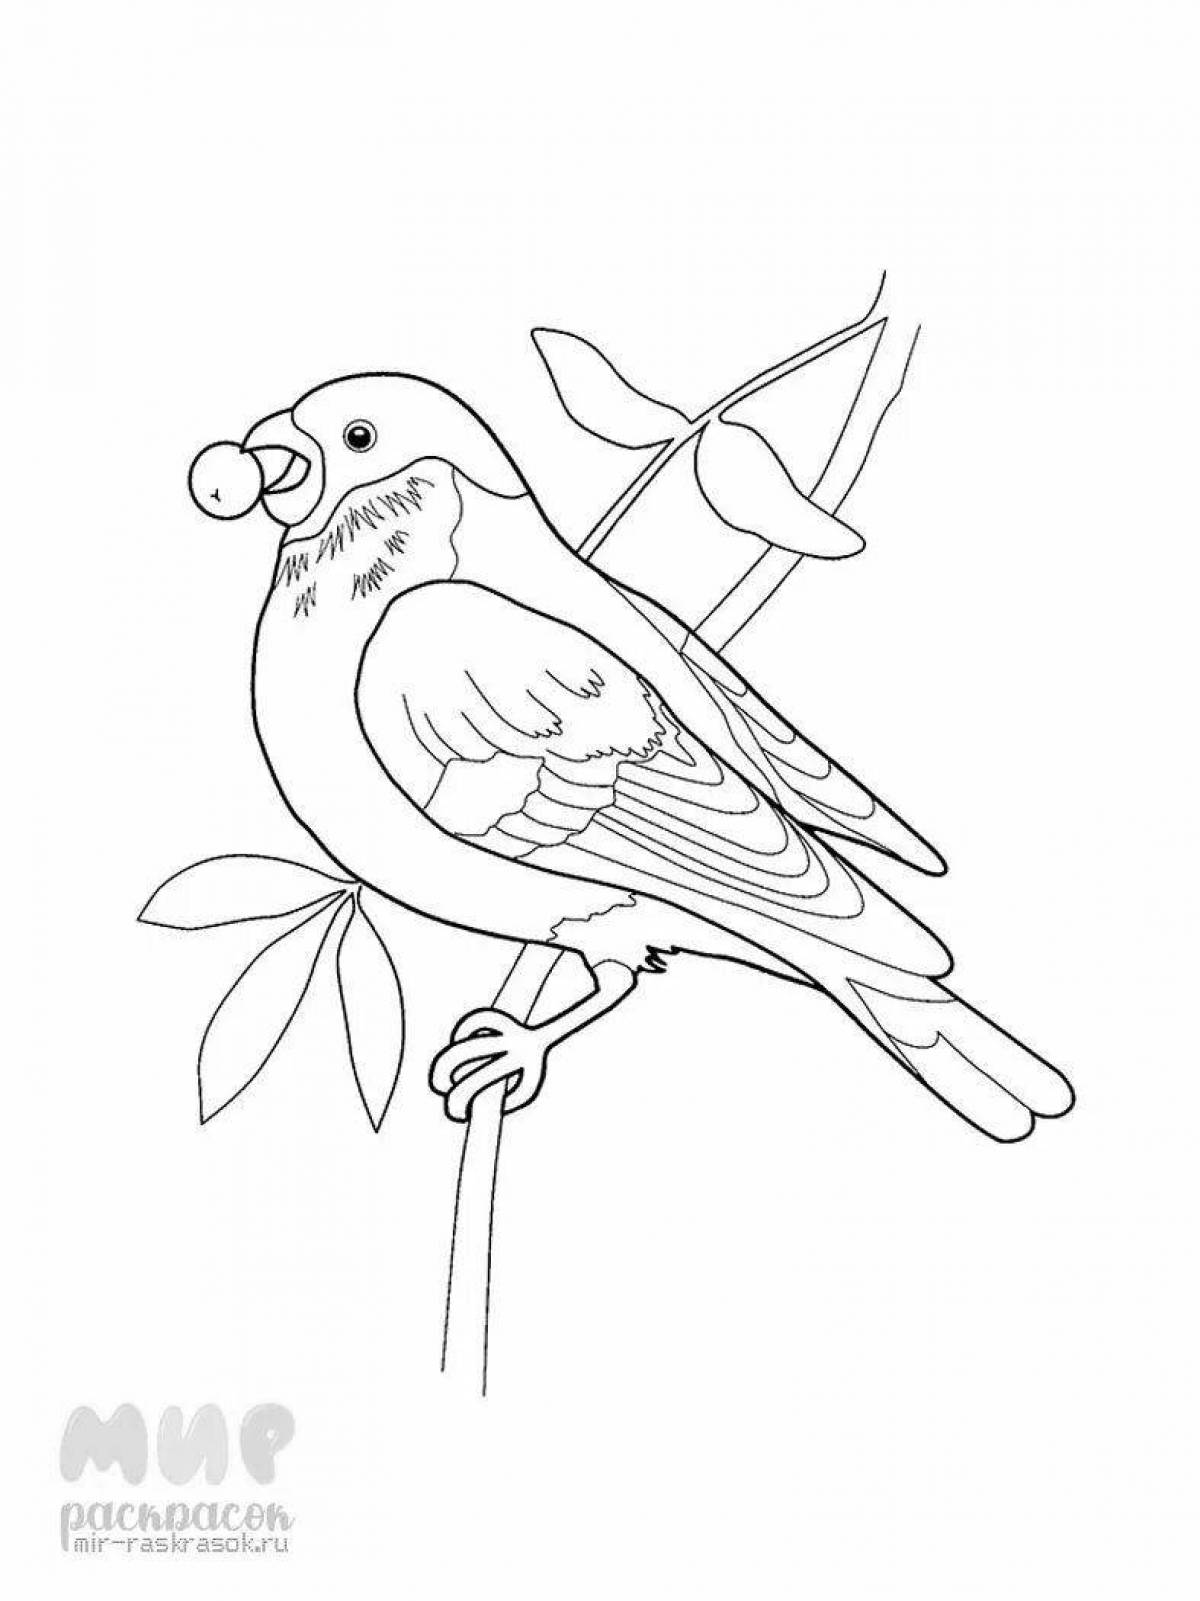 Charming bullfinch and tit coloring book